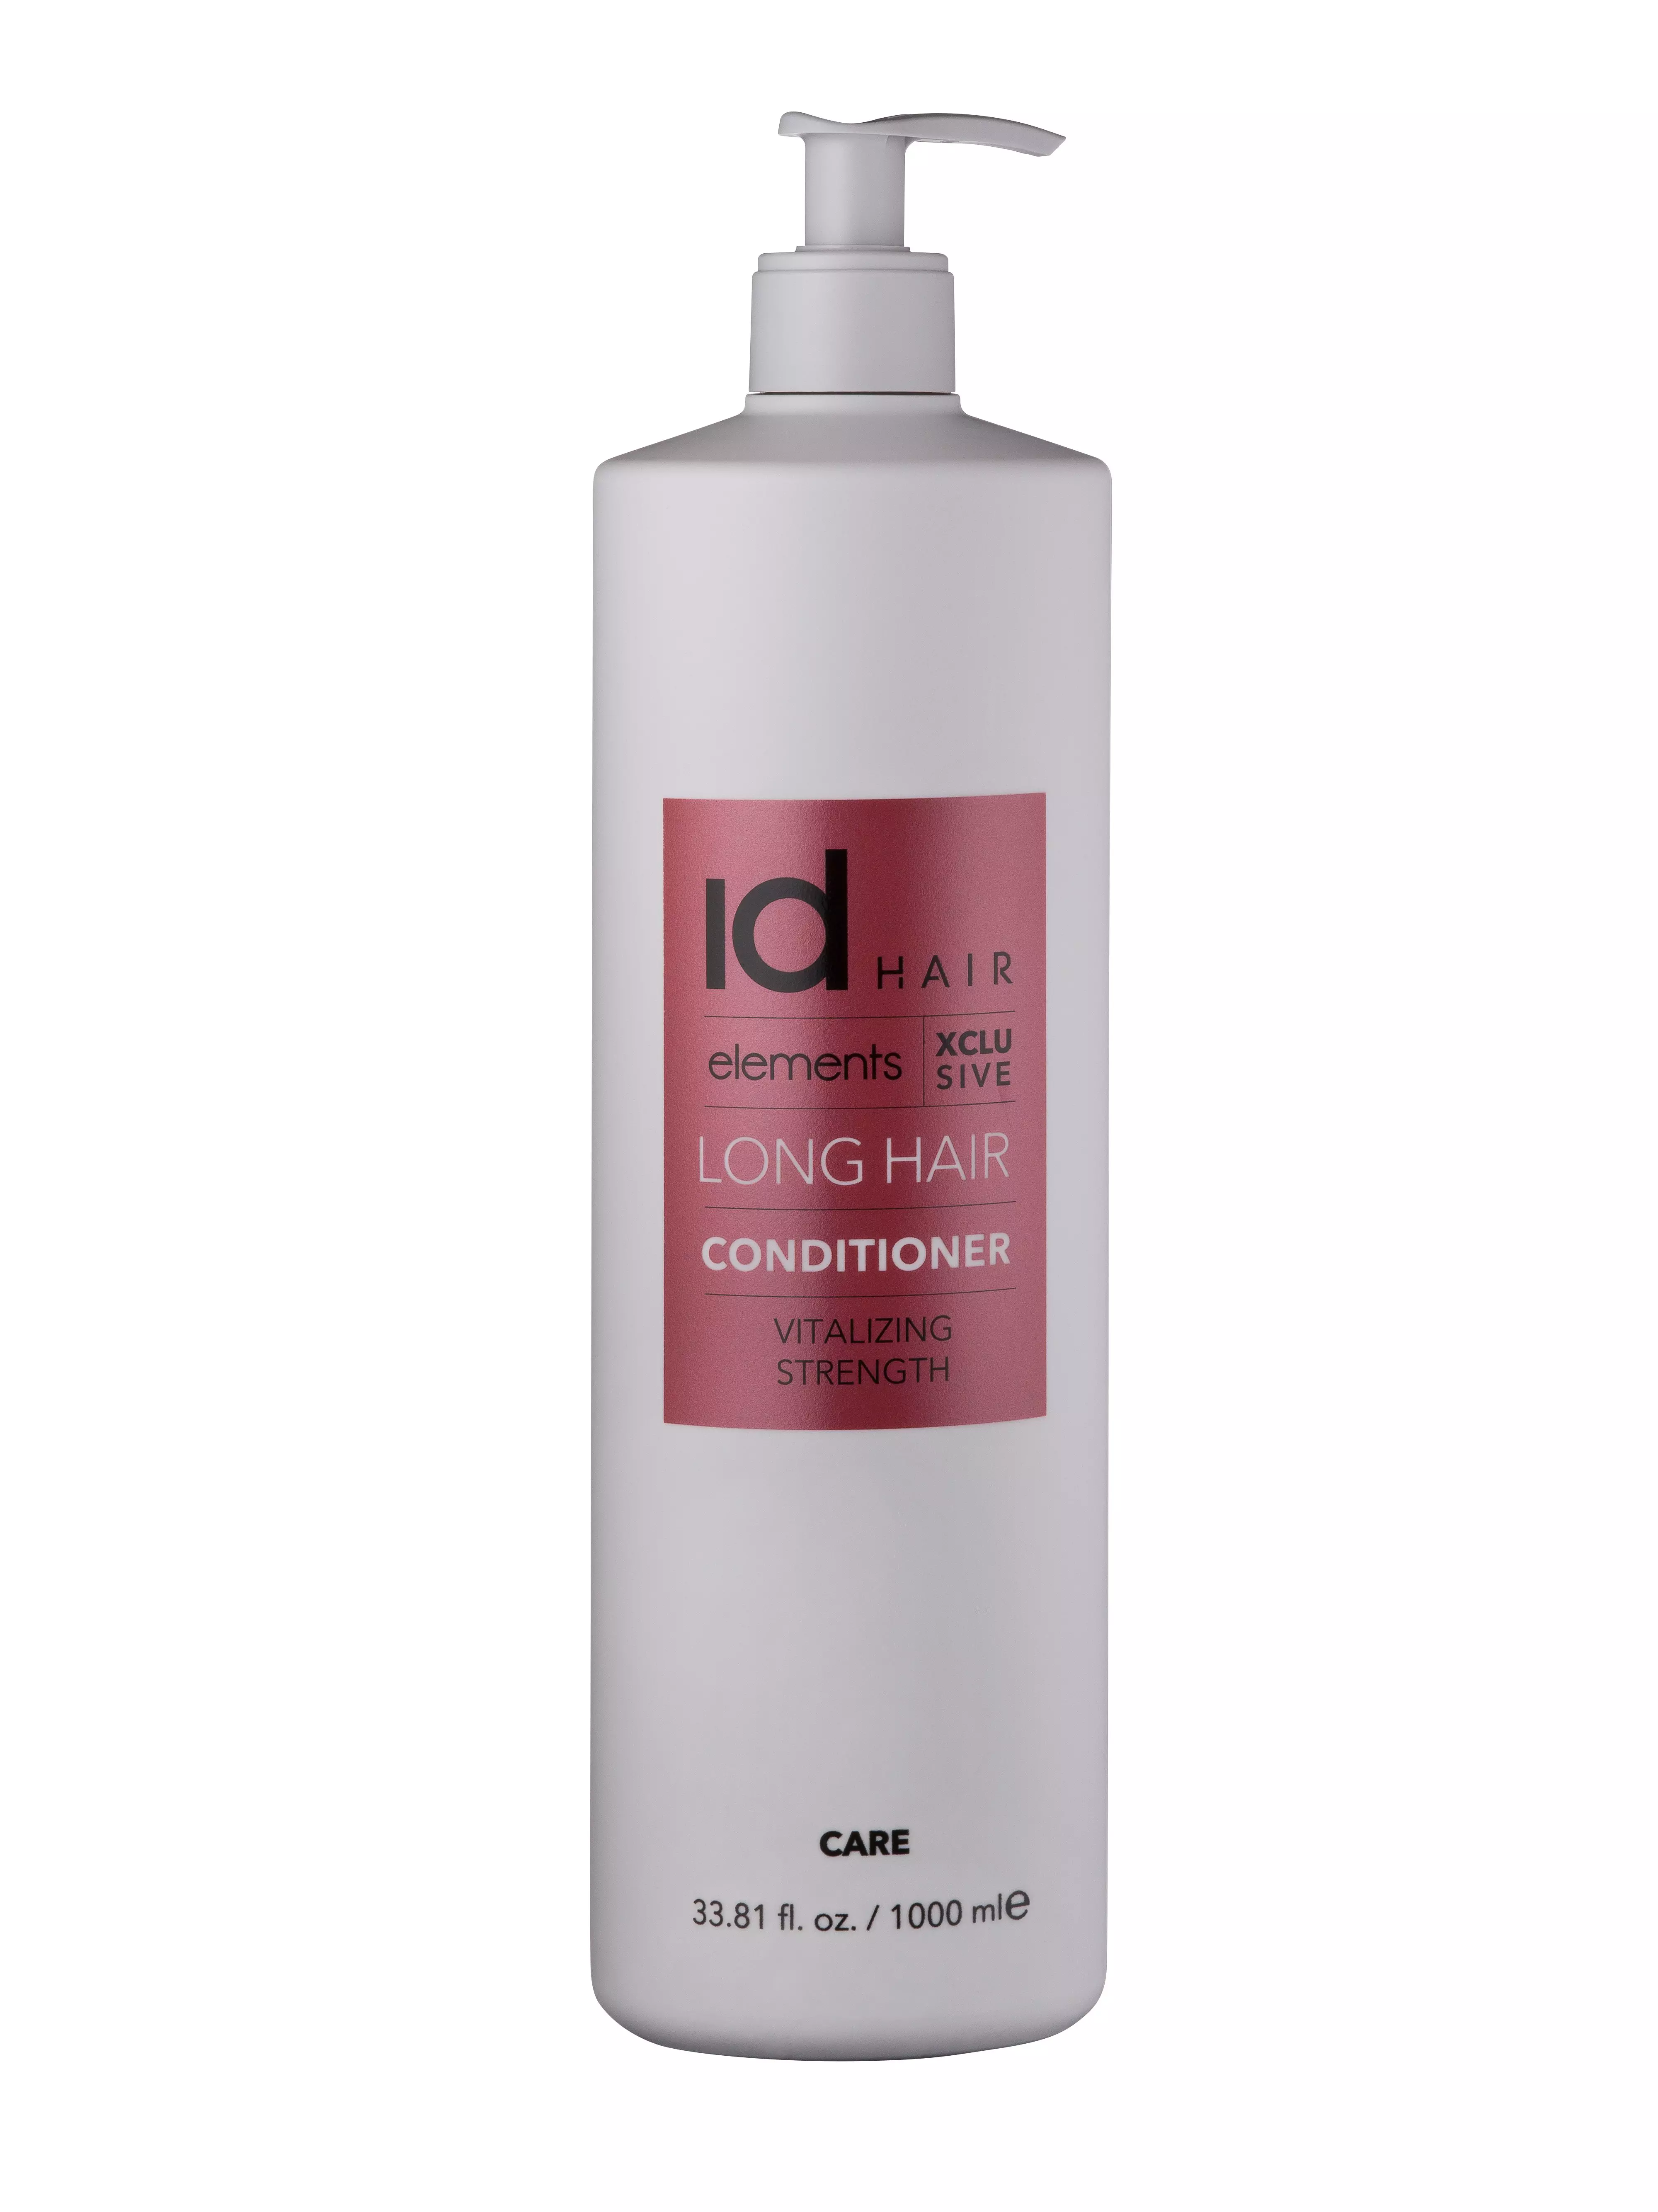 Idhair Elements Xclusive Long Hair Conditioner